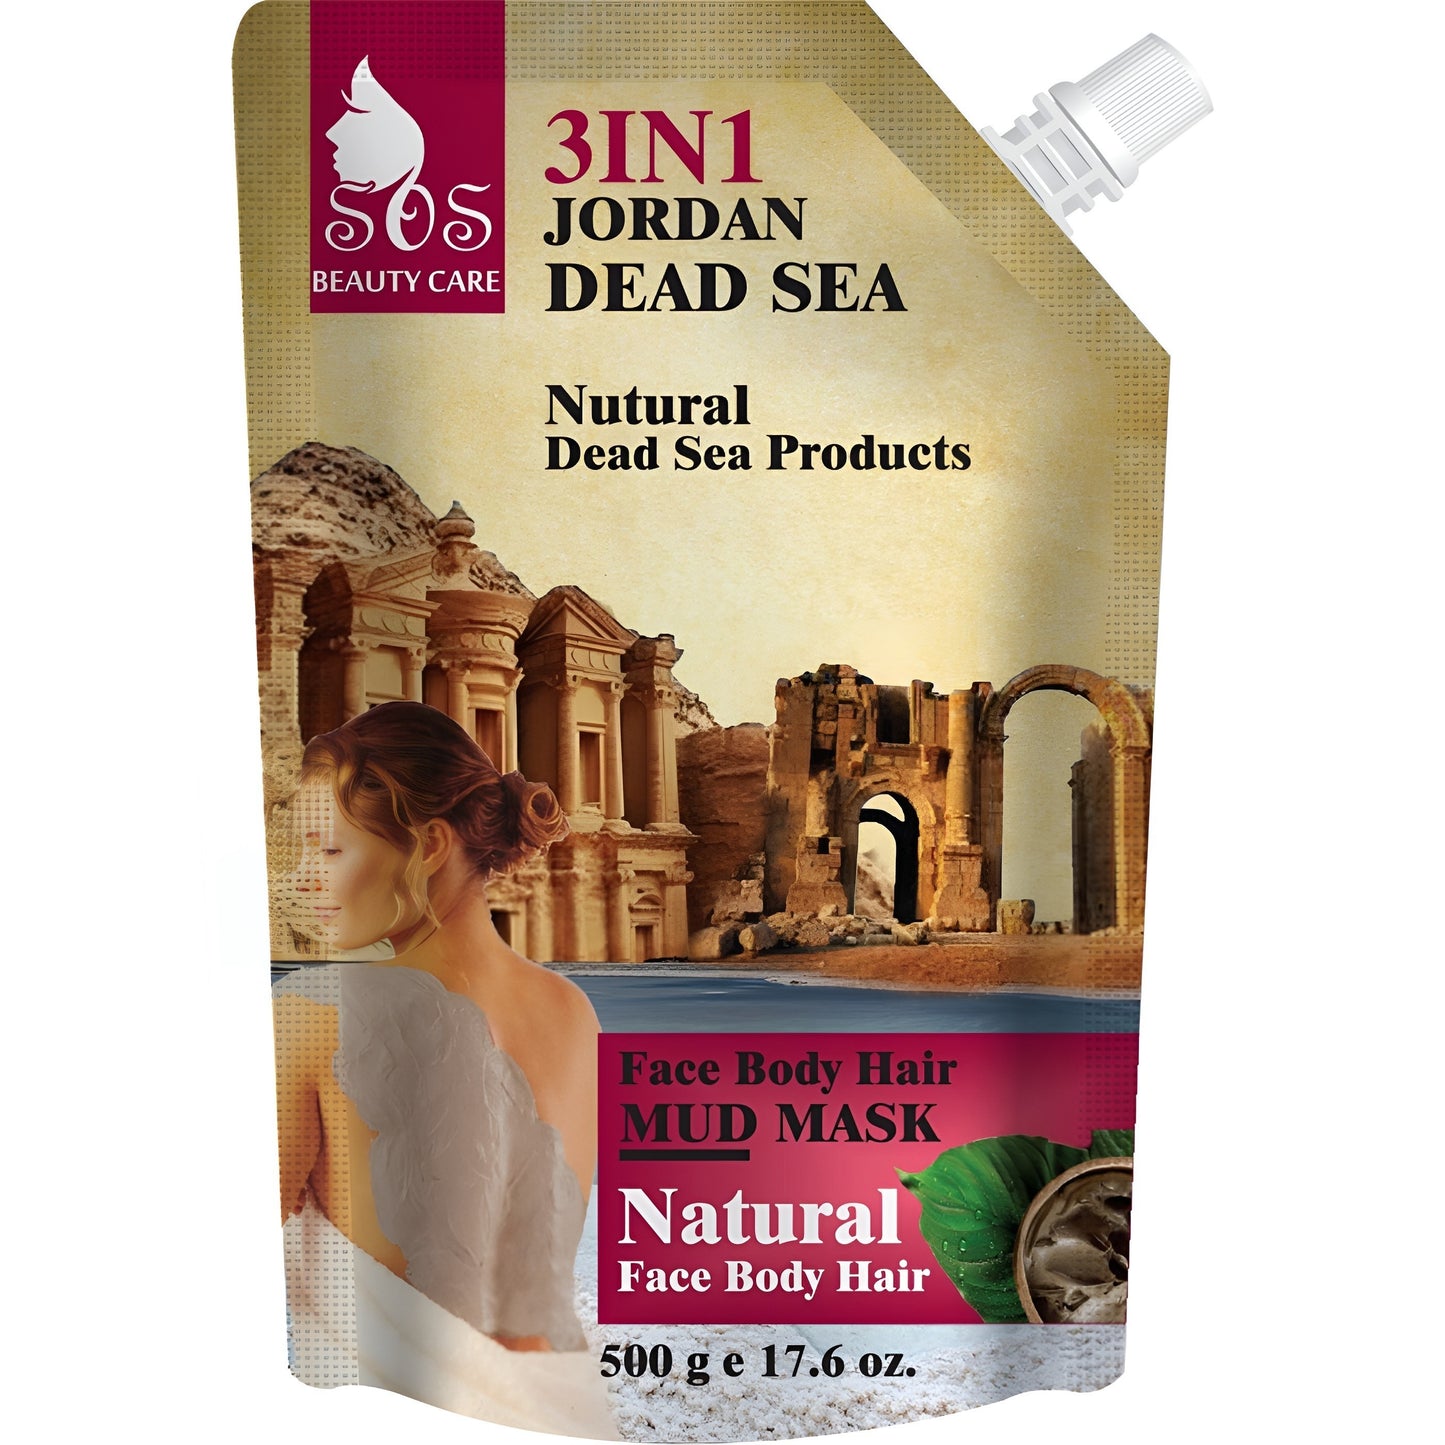 Dead Sea Natural 3 in 1 Mud Mask | Face, Body & Hair | 17.6 oz.